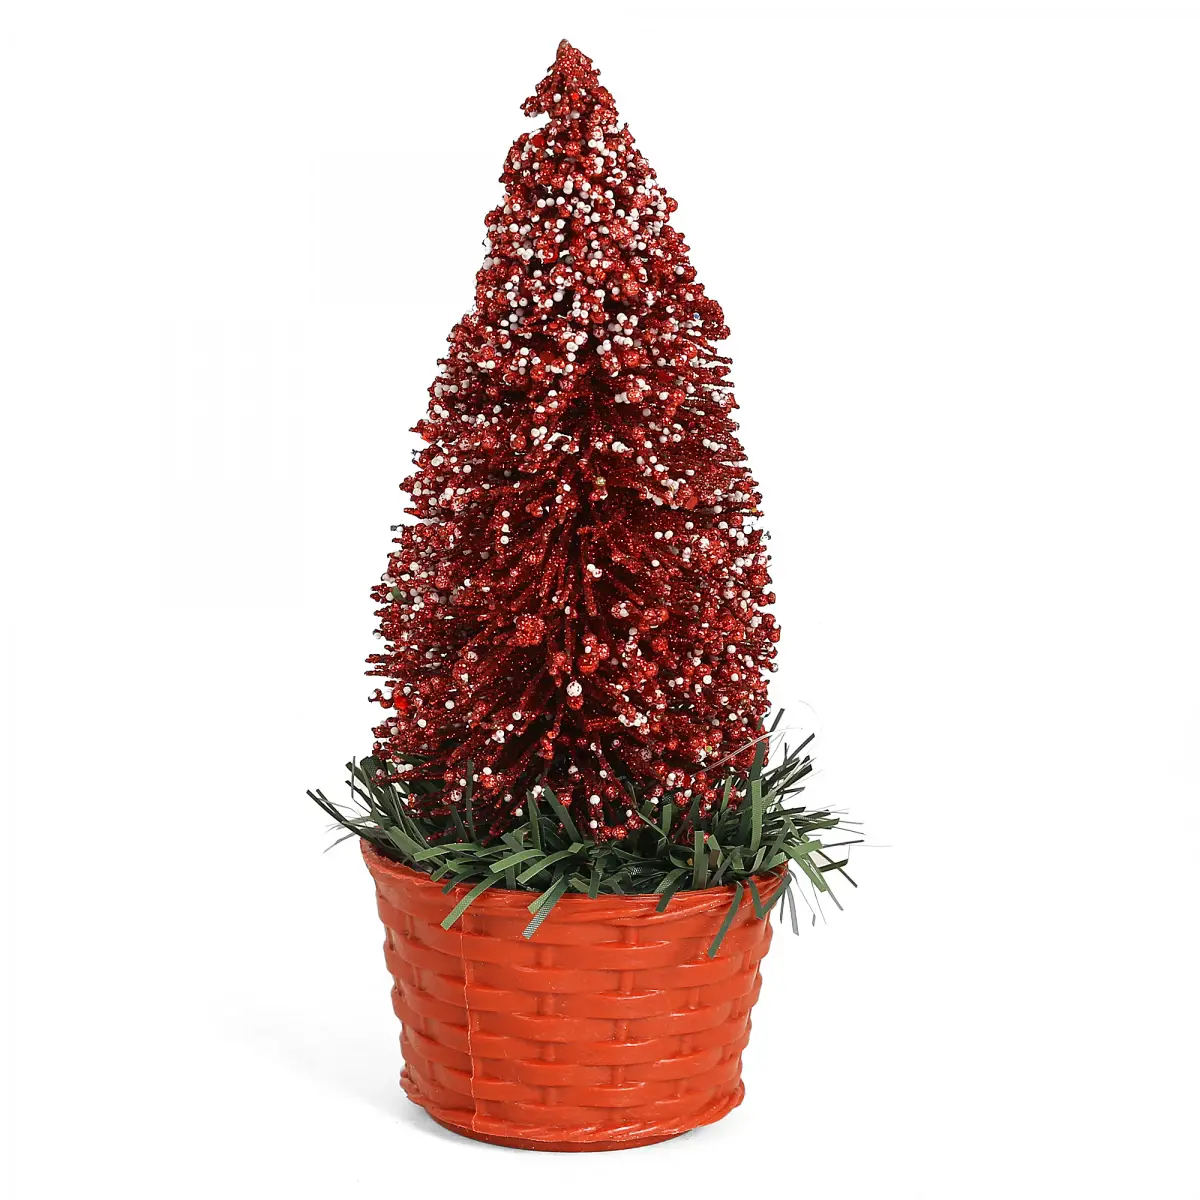 Boing Christmas Tree Decorations, 18cm, Red